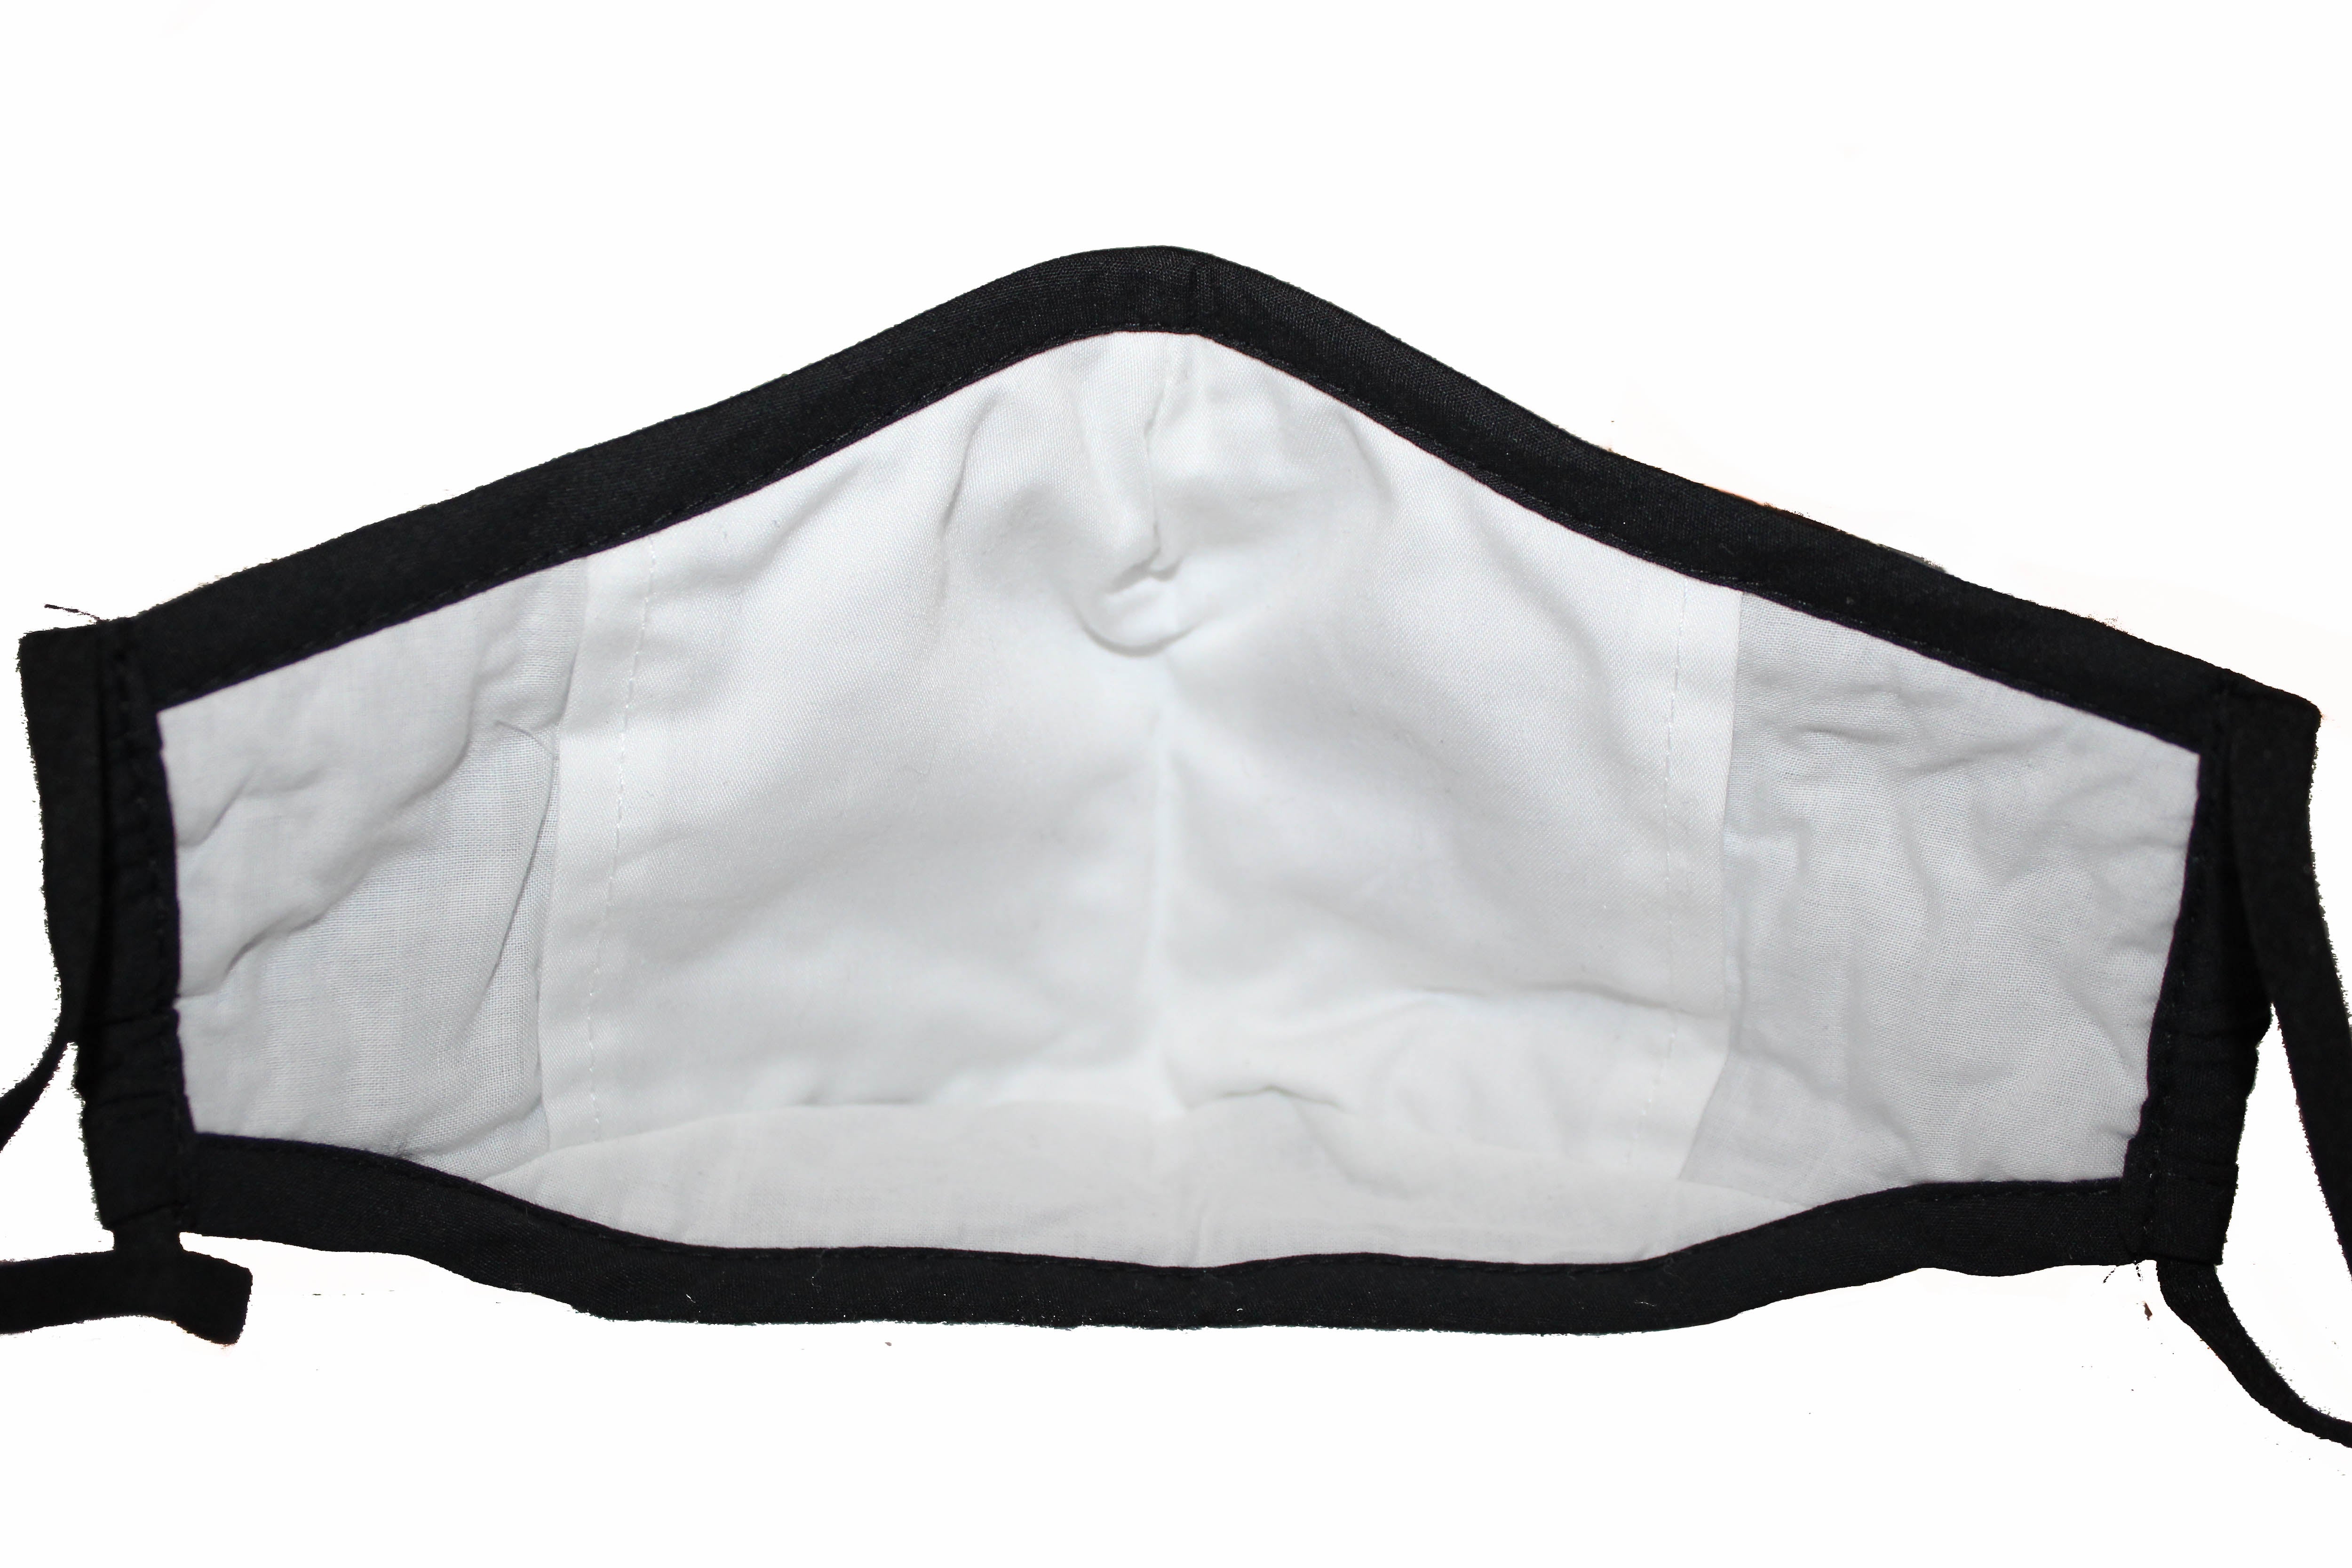 Non Medical Black Lightweight & Comfortable Wear Face Covering with 1 Filter